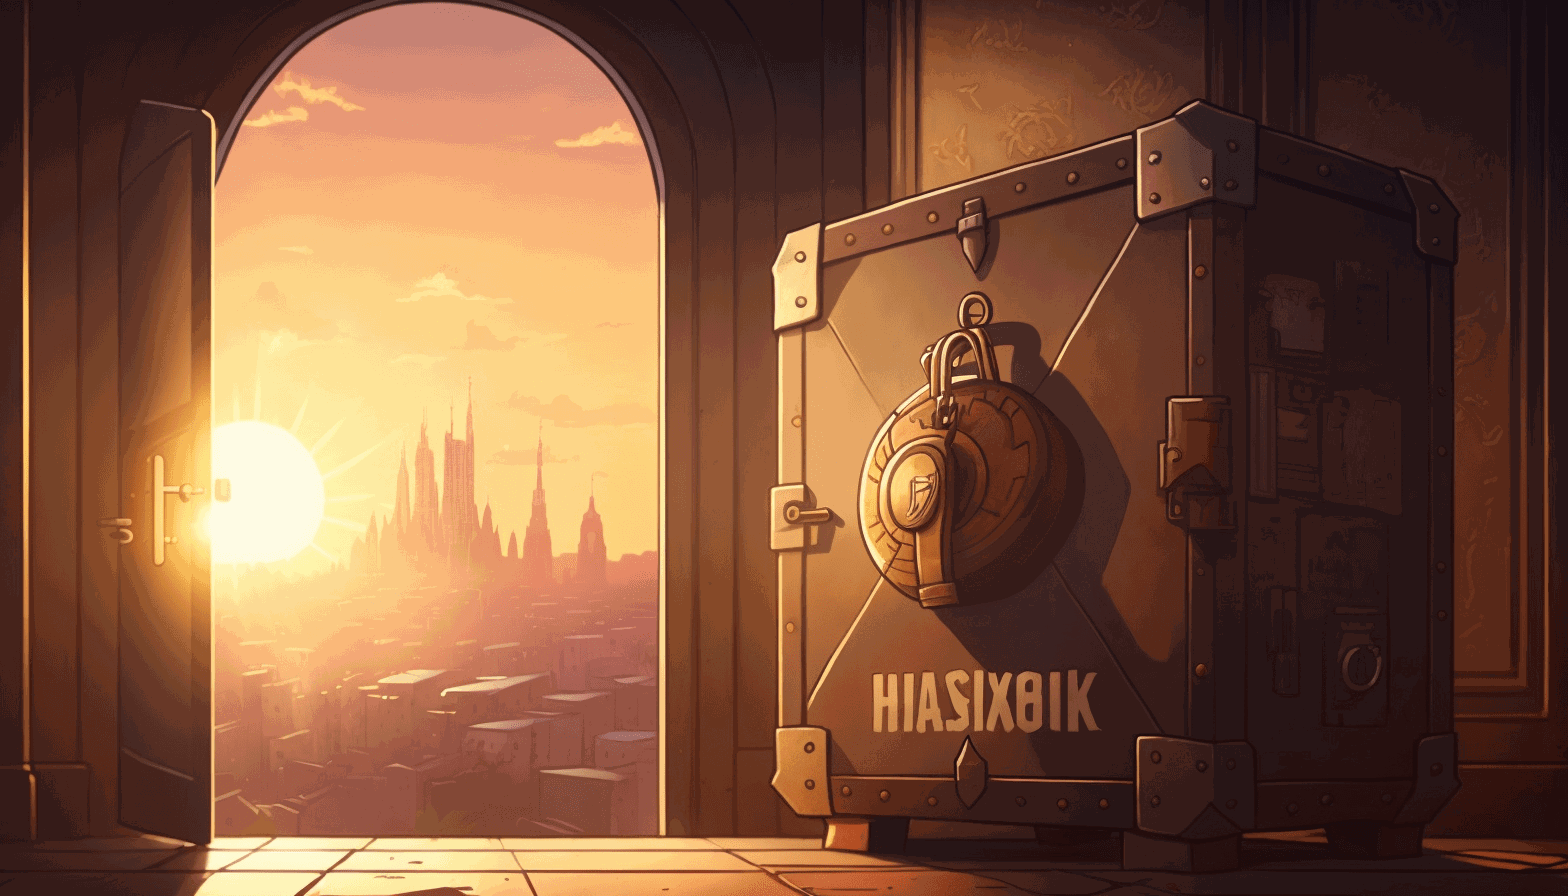 a cartoon vault door being unlocked with a key revealing a treasure chest, all set against a backdrop of a Parisian cityscape at sunset.